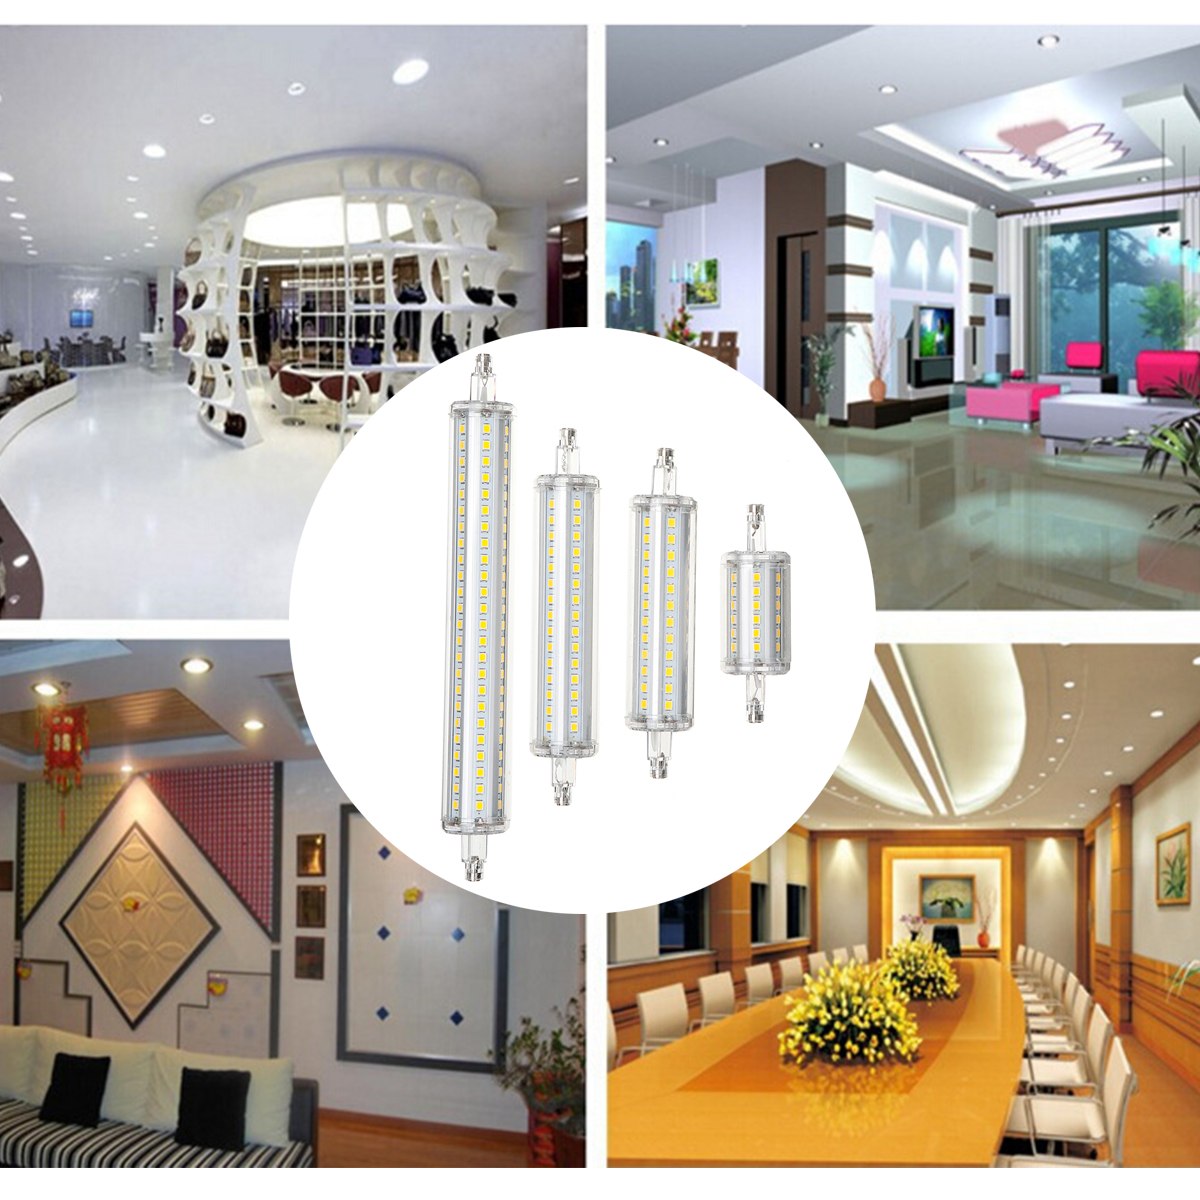 Dimmable-5W-10W-12W-15W-R7S-LED-Corn-Bulb-2835-SMD-Floodlight-Replace-Halogen-Lamp-Indoor-Home-Light-1728600-10